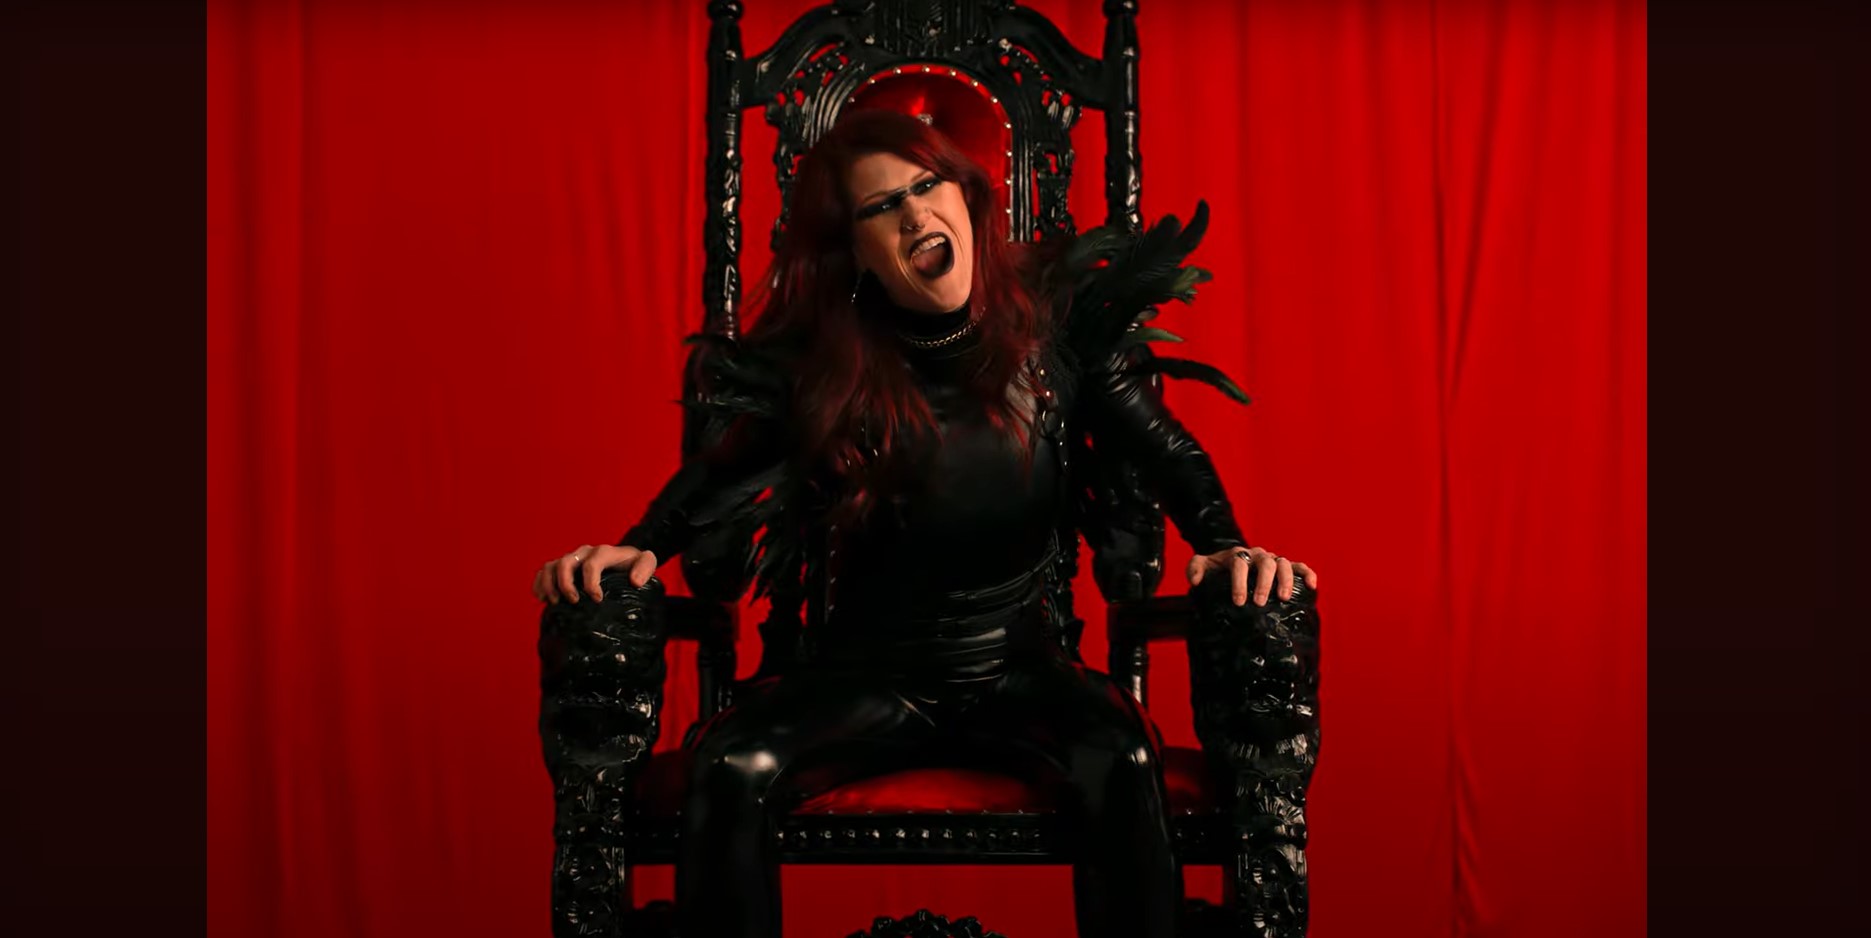 Watch New Kittie Video For "Eyes Wide Open", Their First New Song In 13 Years